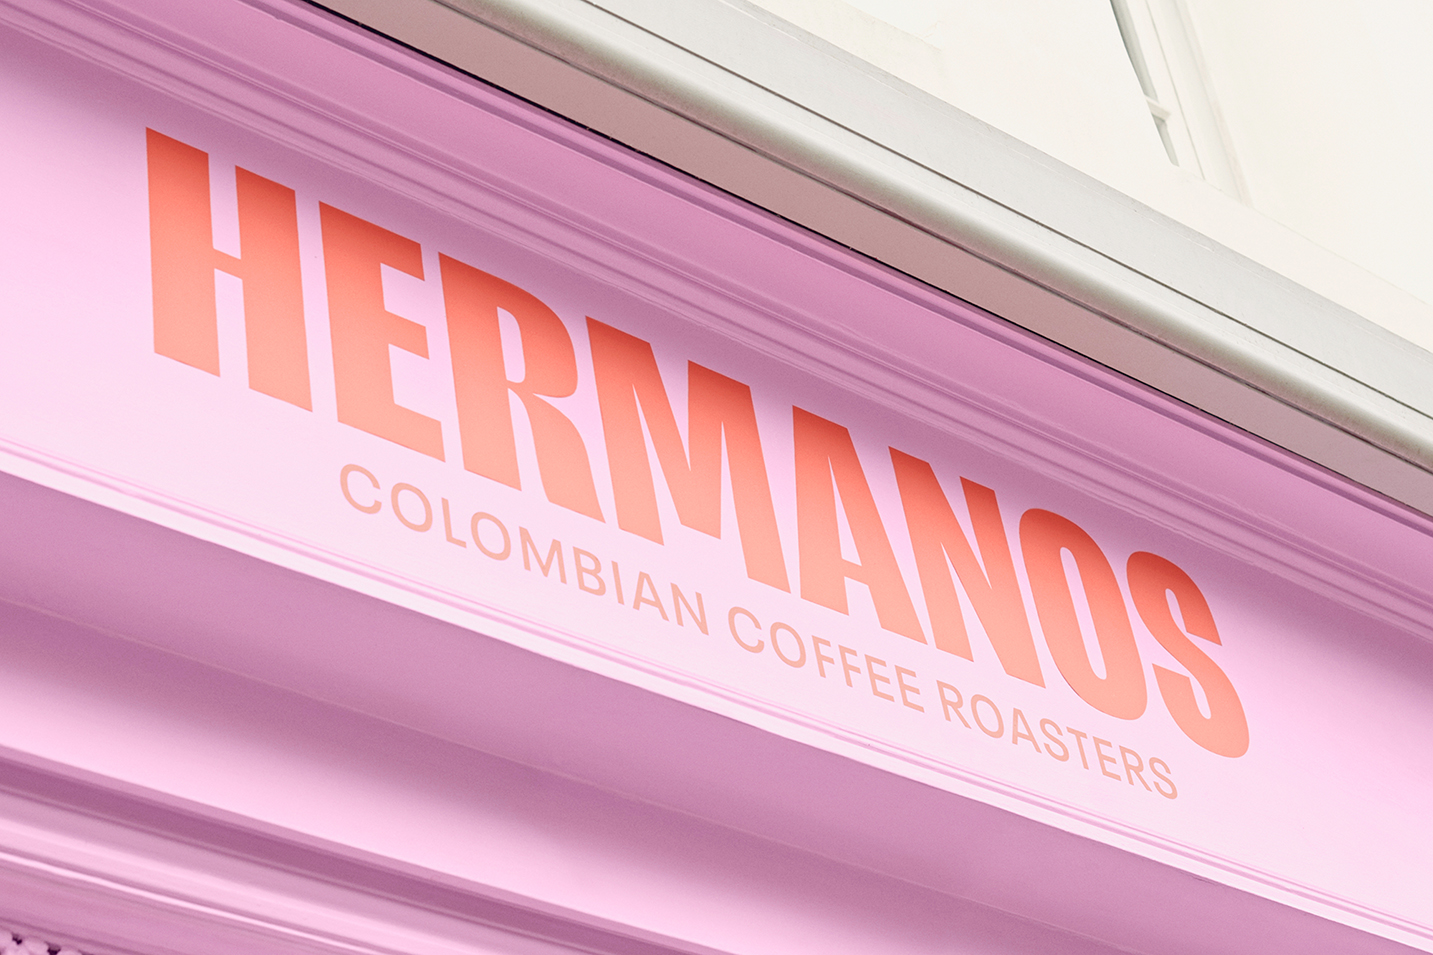 True Colombian Spirit Embodied for Premium Coffee Roasters Brand Identity by Fellow Studio